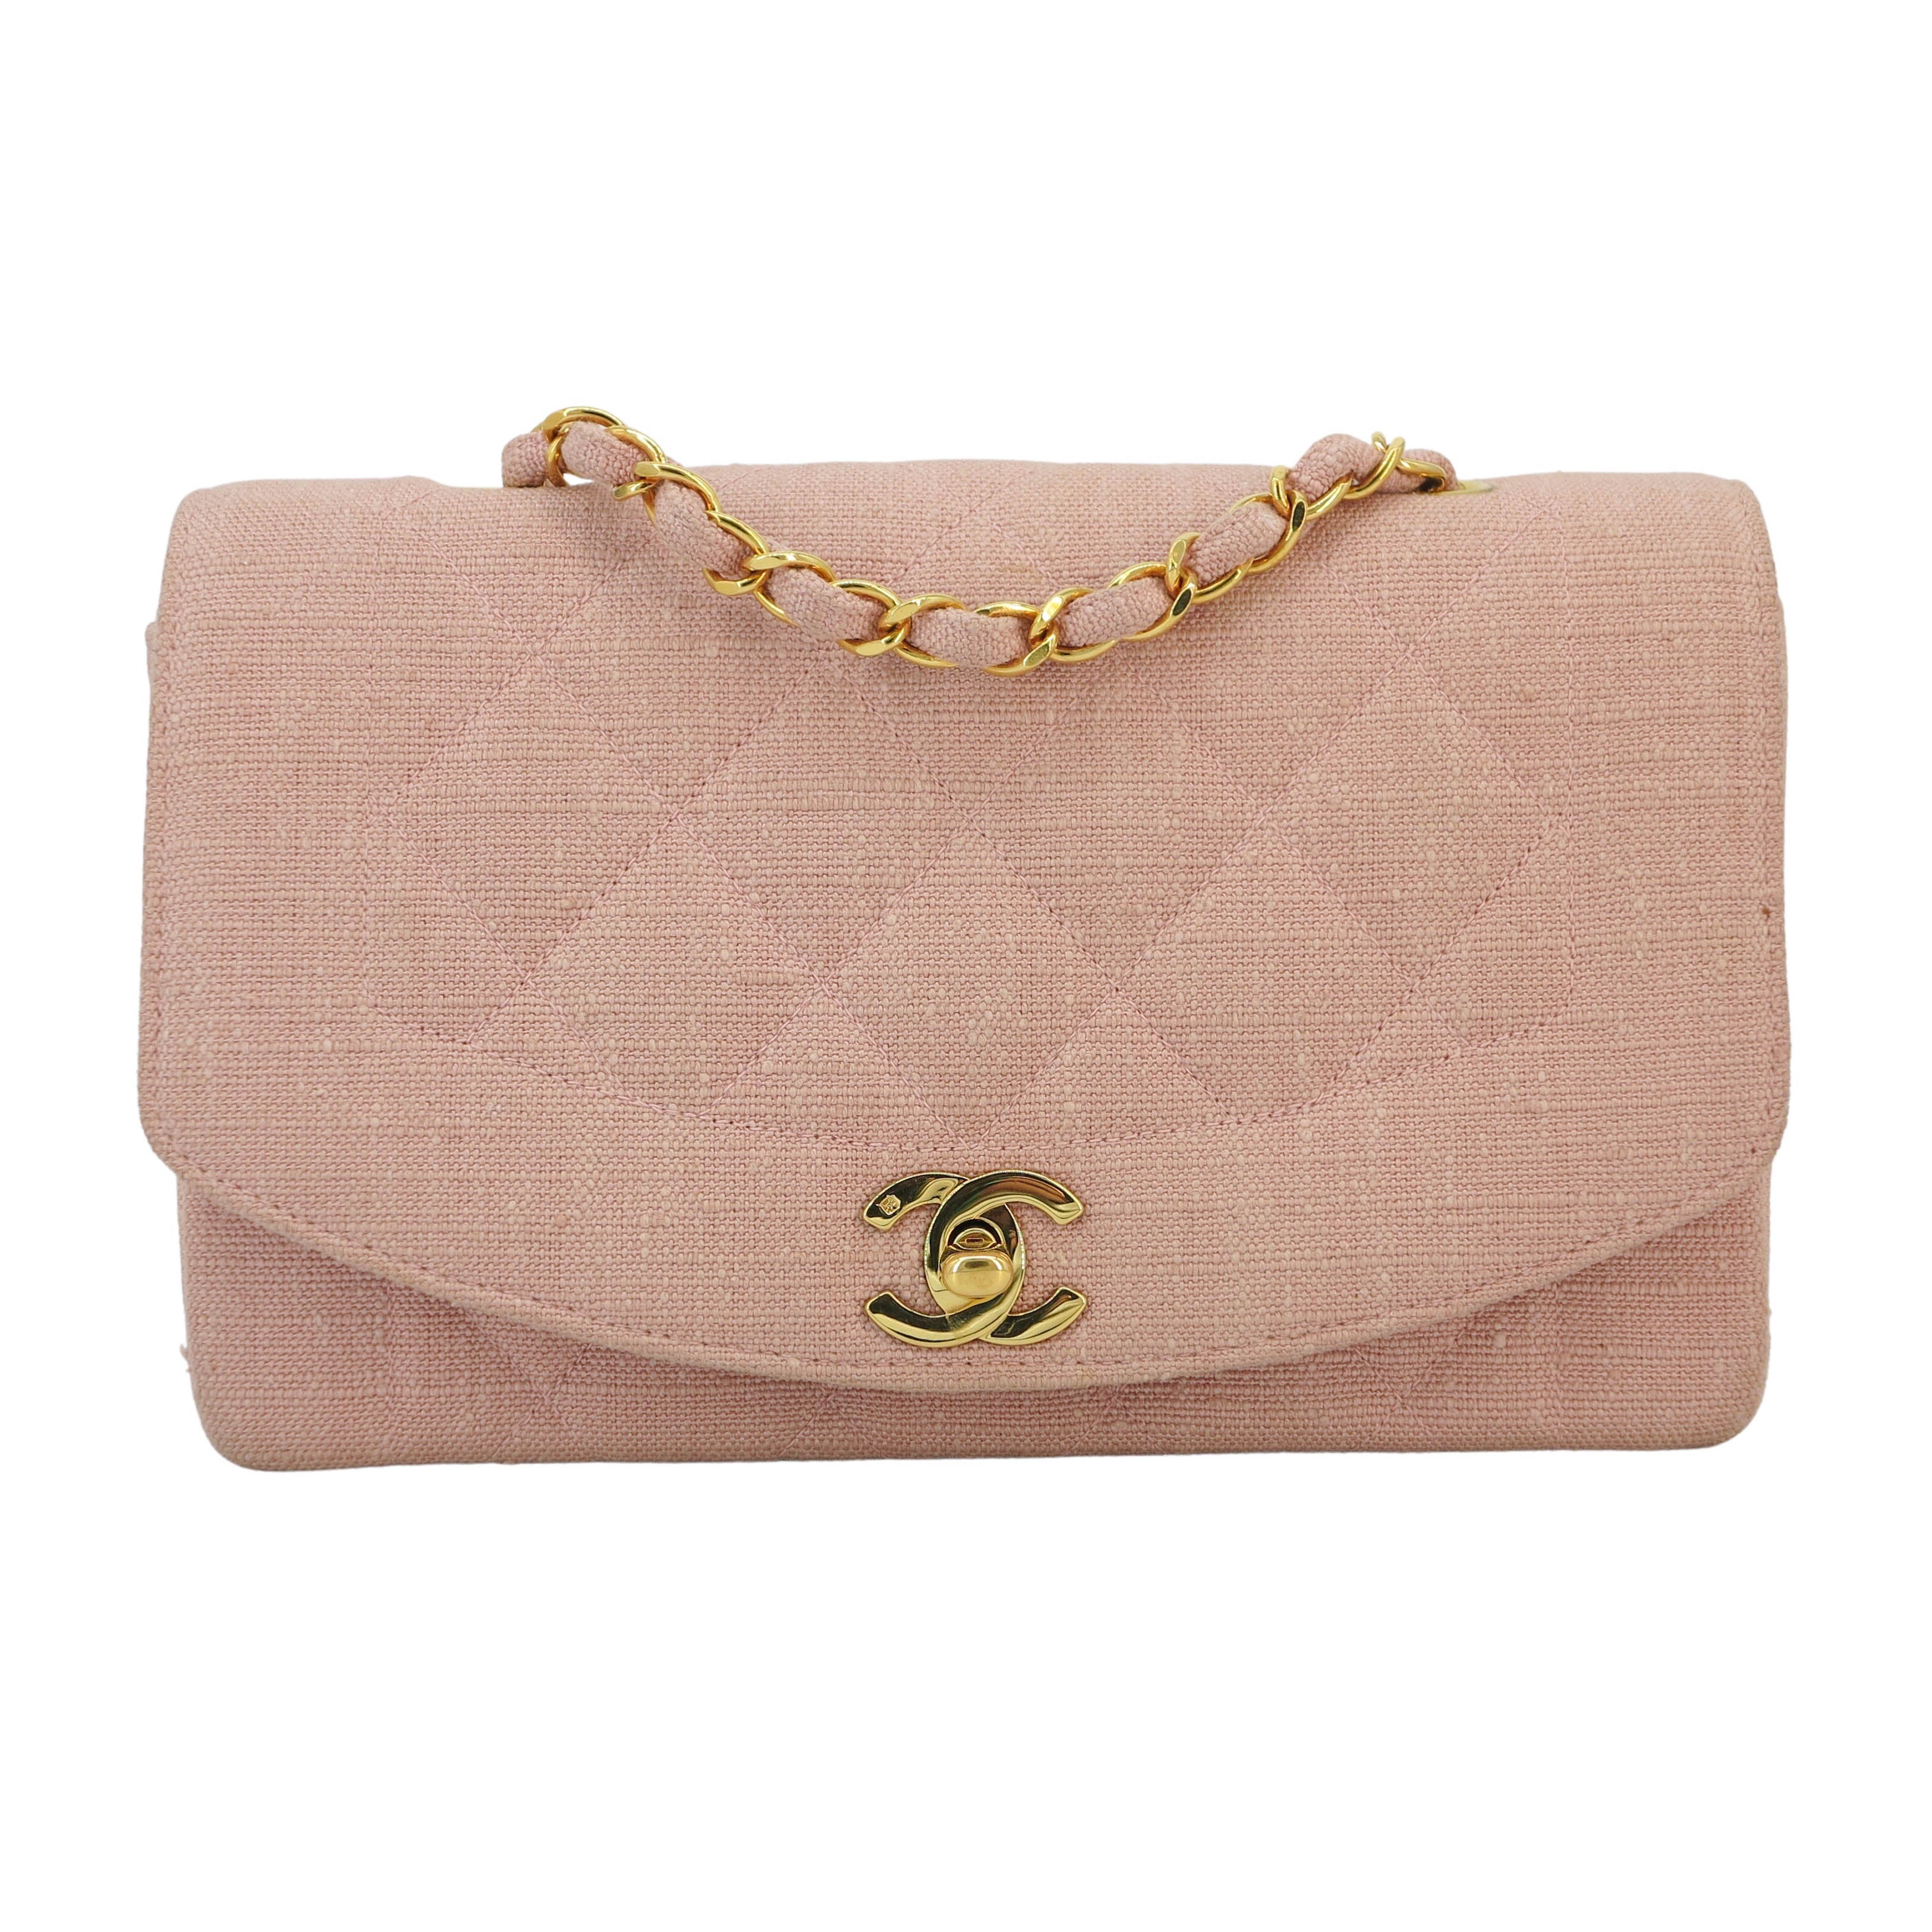 CHANELVintage Small Diana Flap Bag in Pink Linen